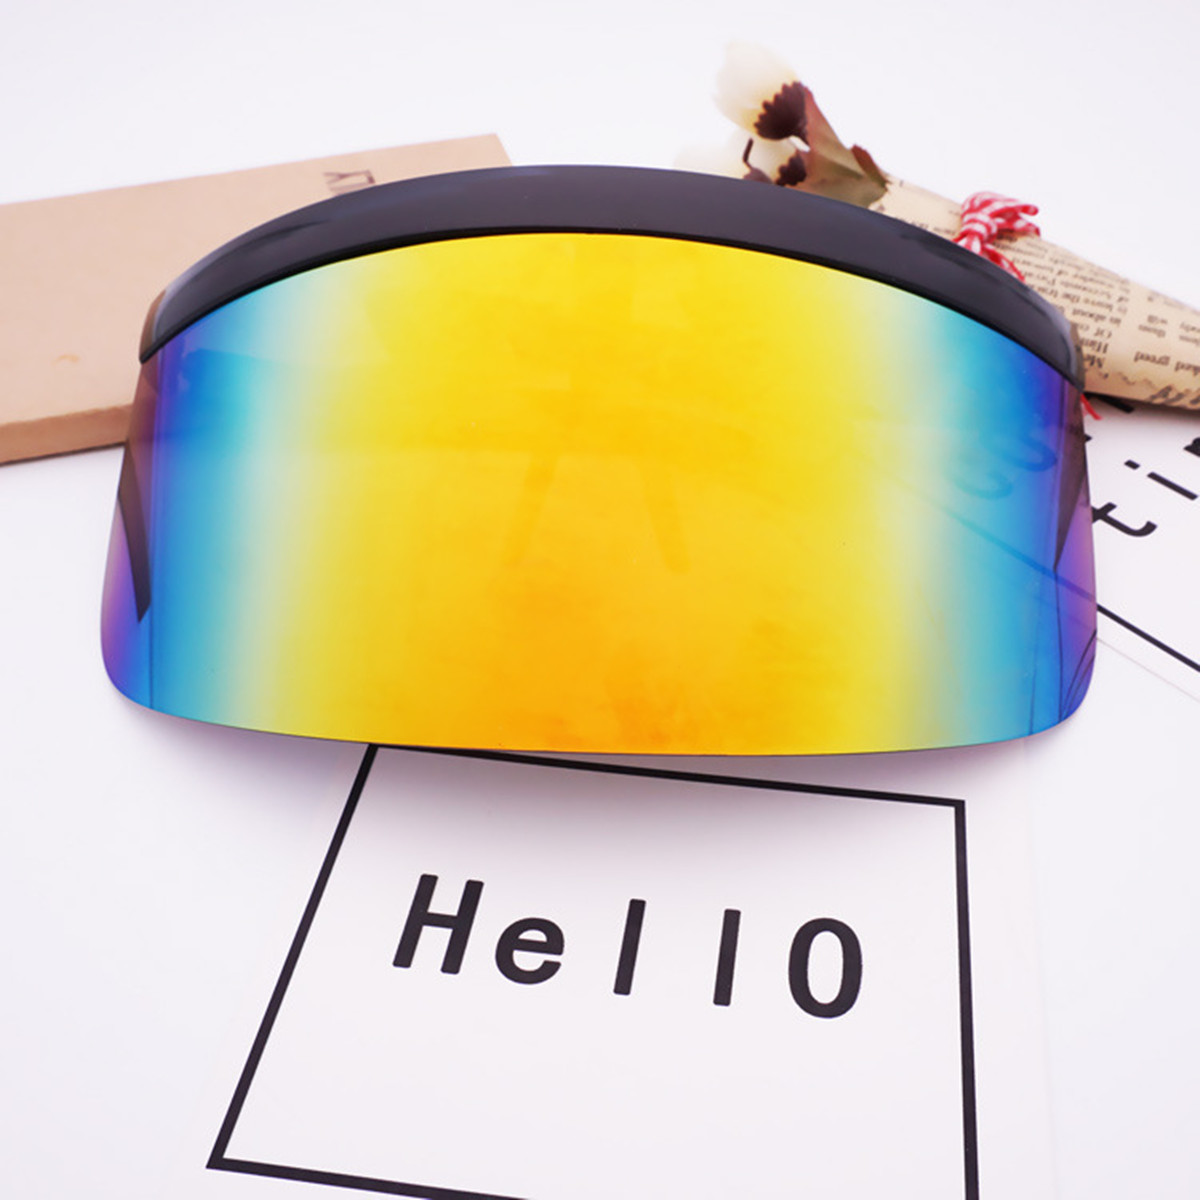 Polarized-Lens-Mask-Sun-Glasses-Futuristic-Costume-Party-Eyes-Mirrored-Frame-5-Color-1425321-3